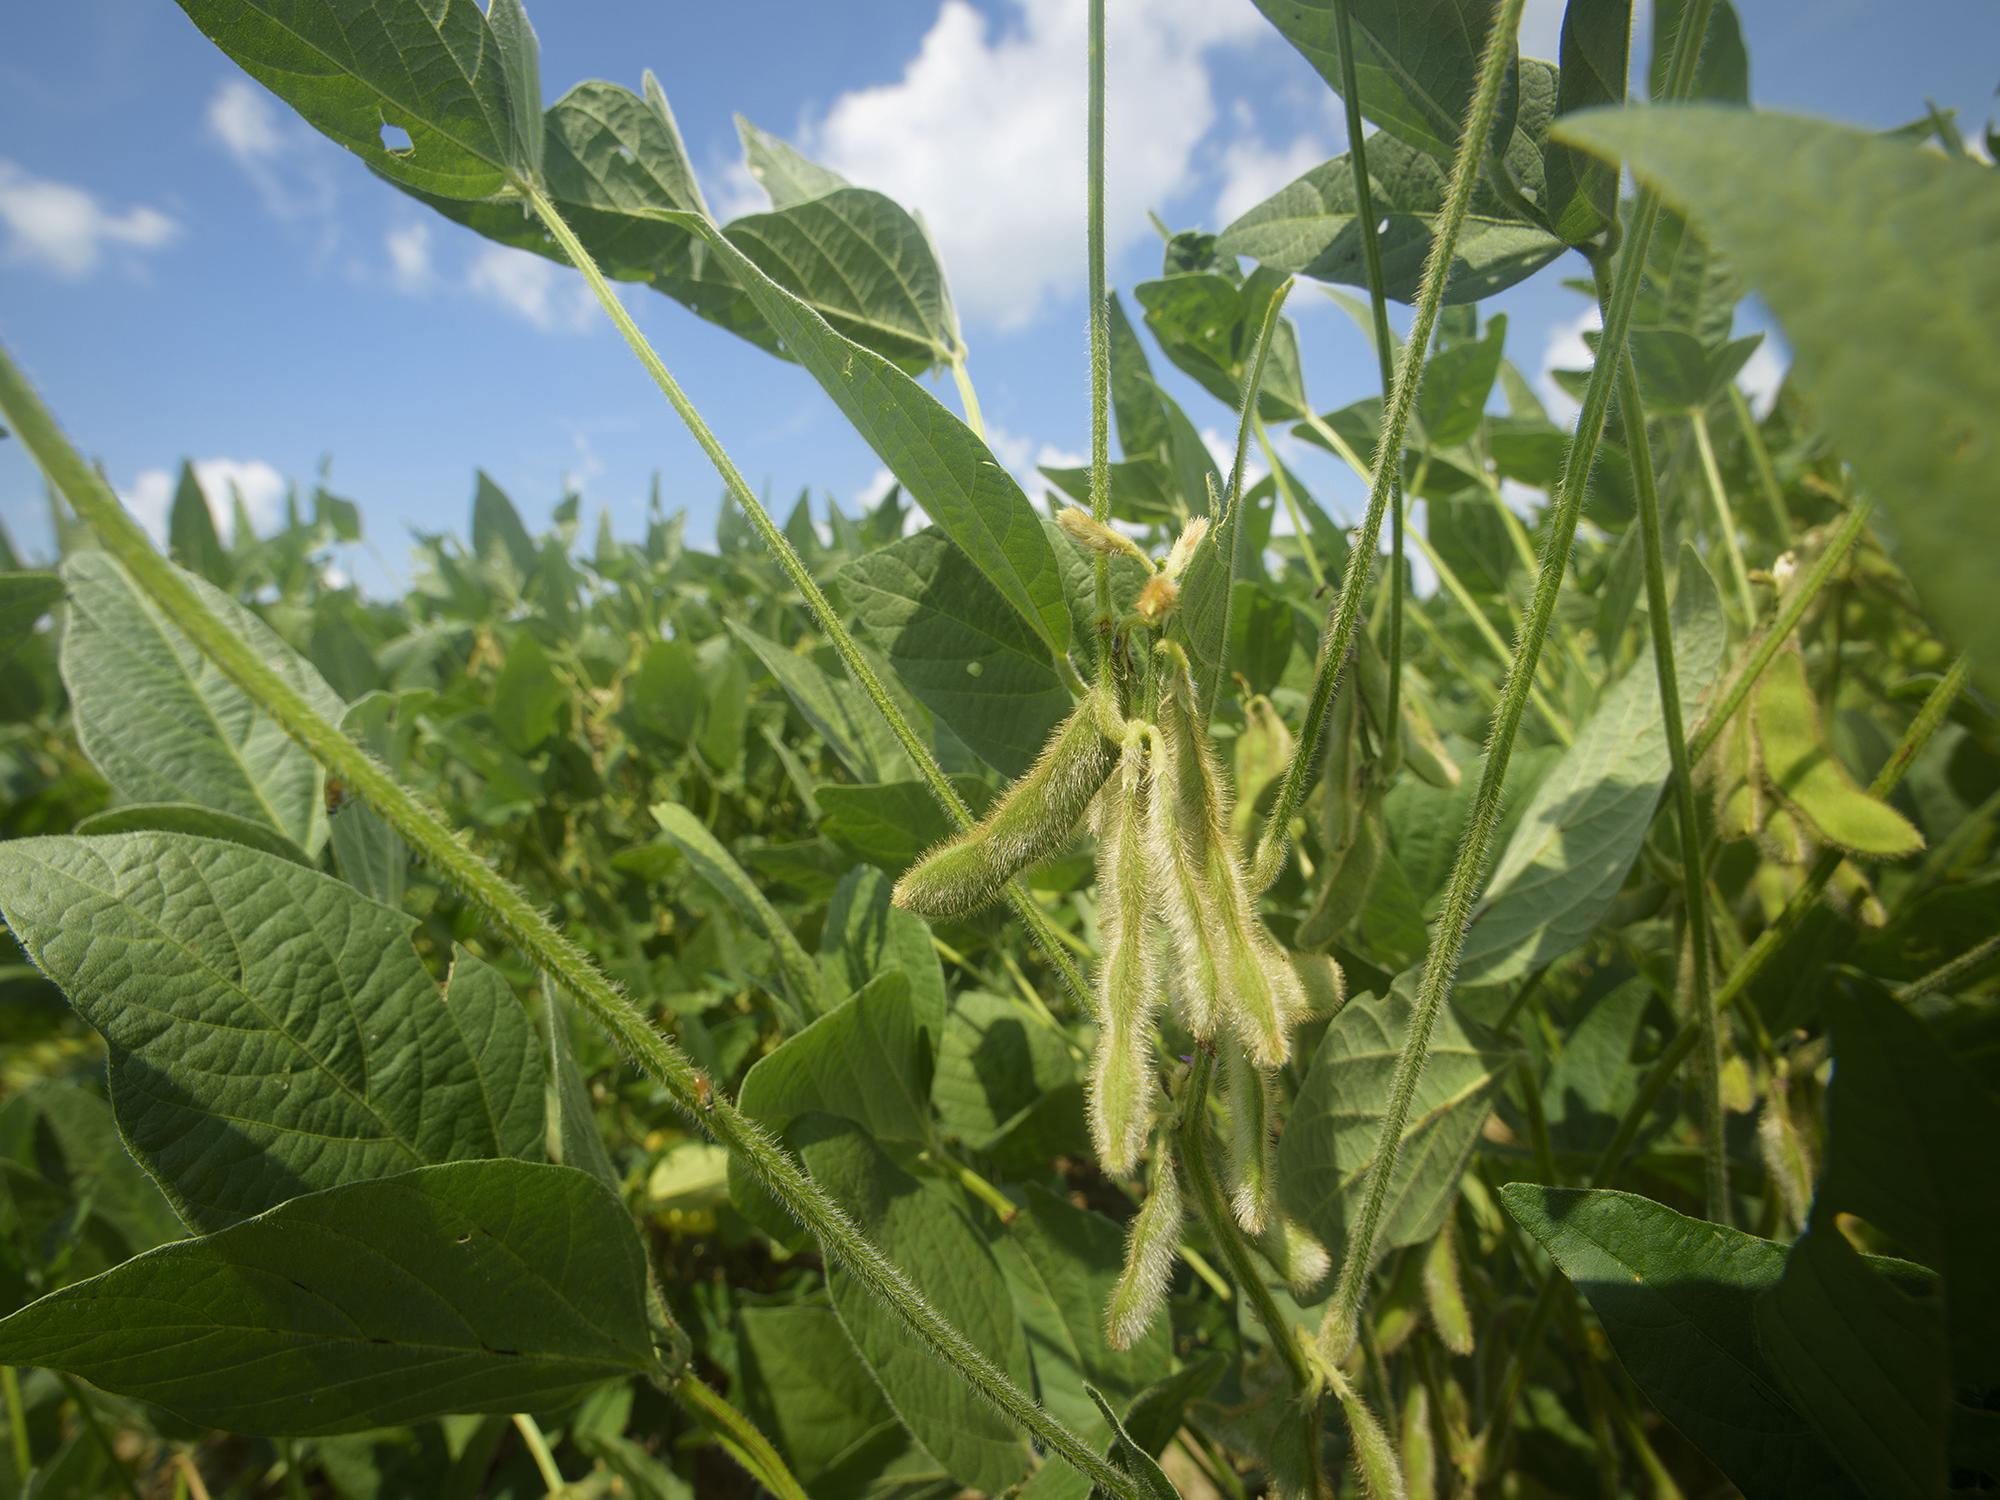 Producers planted much of Mississippi’s soybean crop early, allowing it to avoid many late-season threats from diseases and insects. These soybeans were growing July 25, 2017, on the Mississippi State University R.R. Foil Plant Science Research Center in Starkville, Mississippi. (Photo by MSU Extension Service/Kevin Hudson)